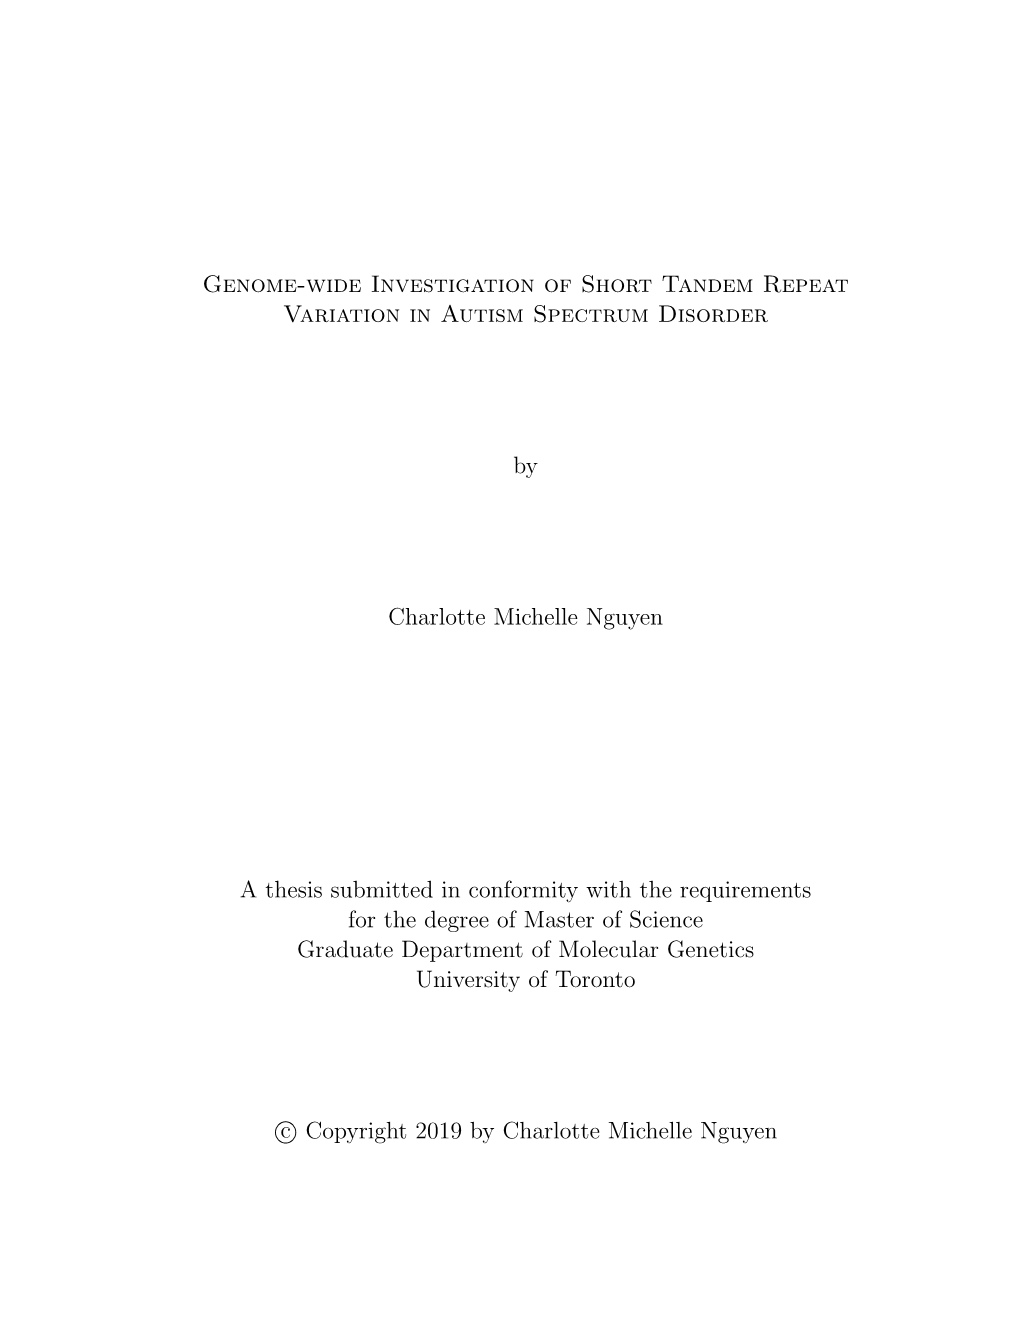 Genome-Wide Investigation of Short Tandem Repeat Variation in Autism Spectrum Disorder by Charlotte Michelle Nguyen a Thesis